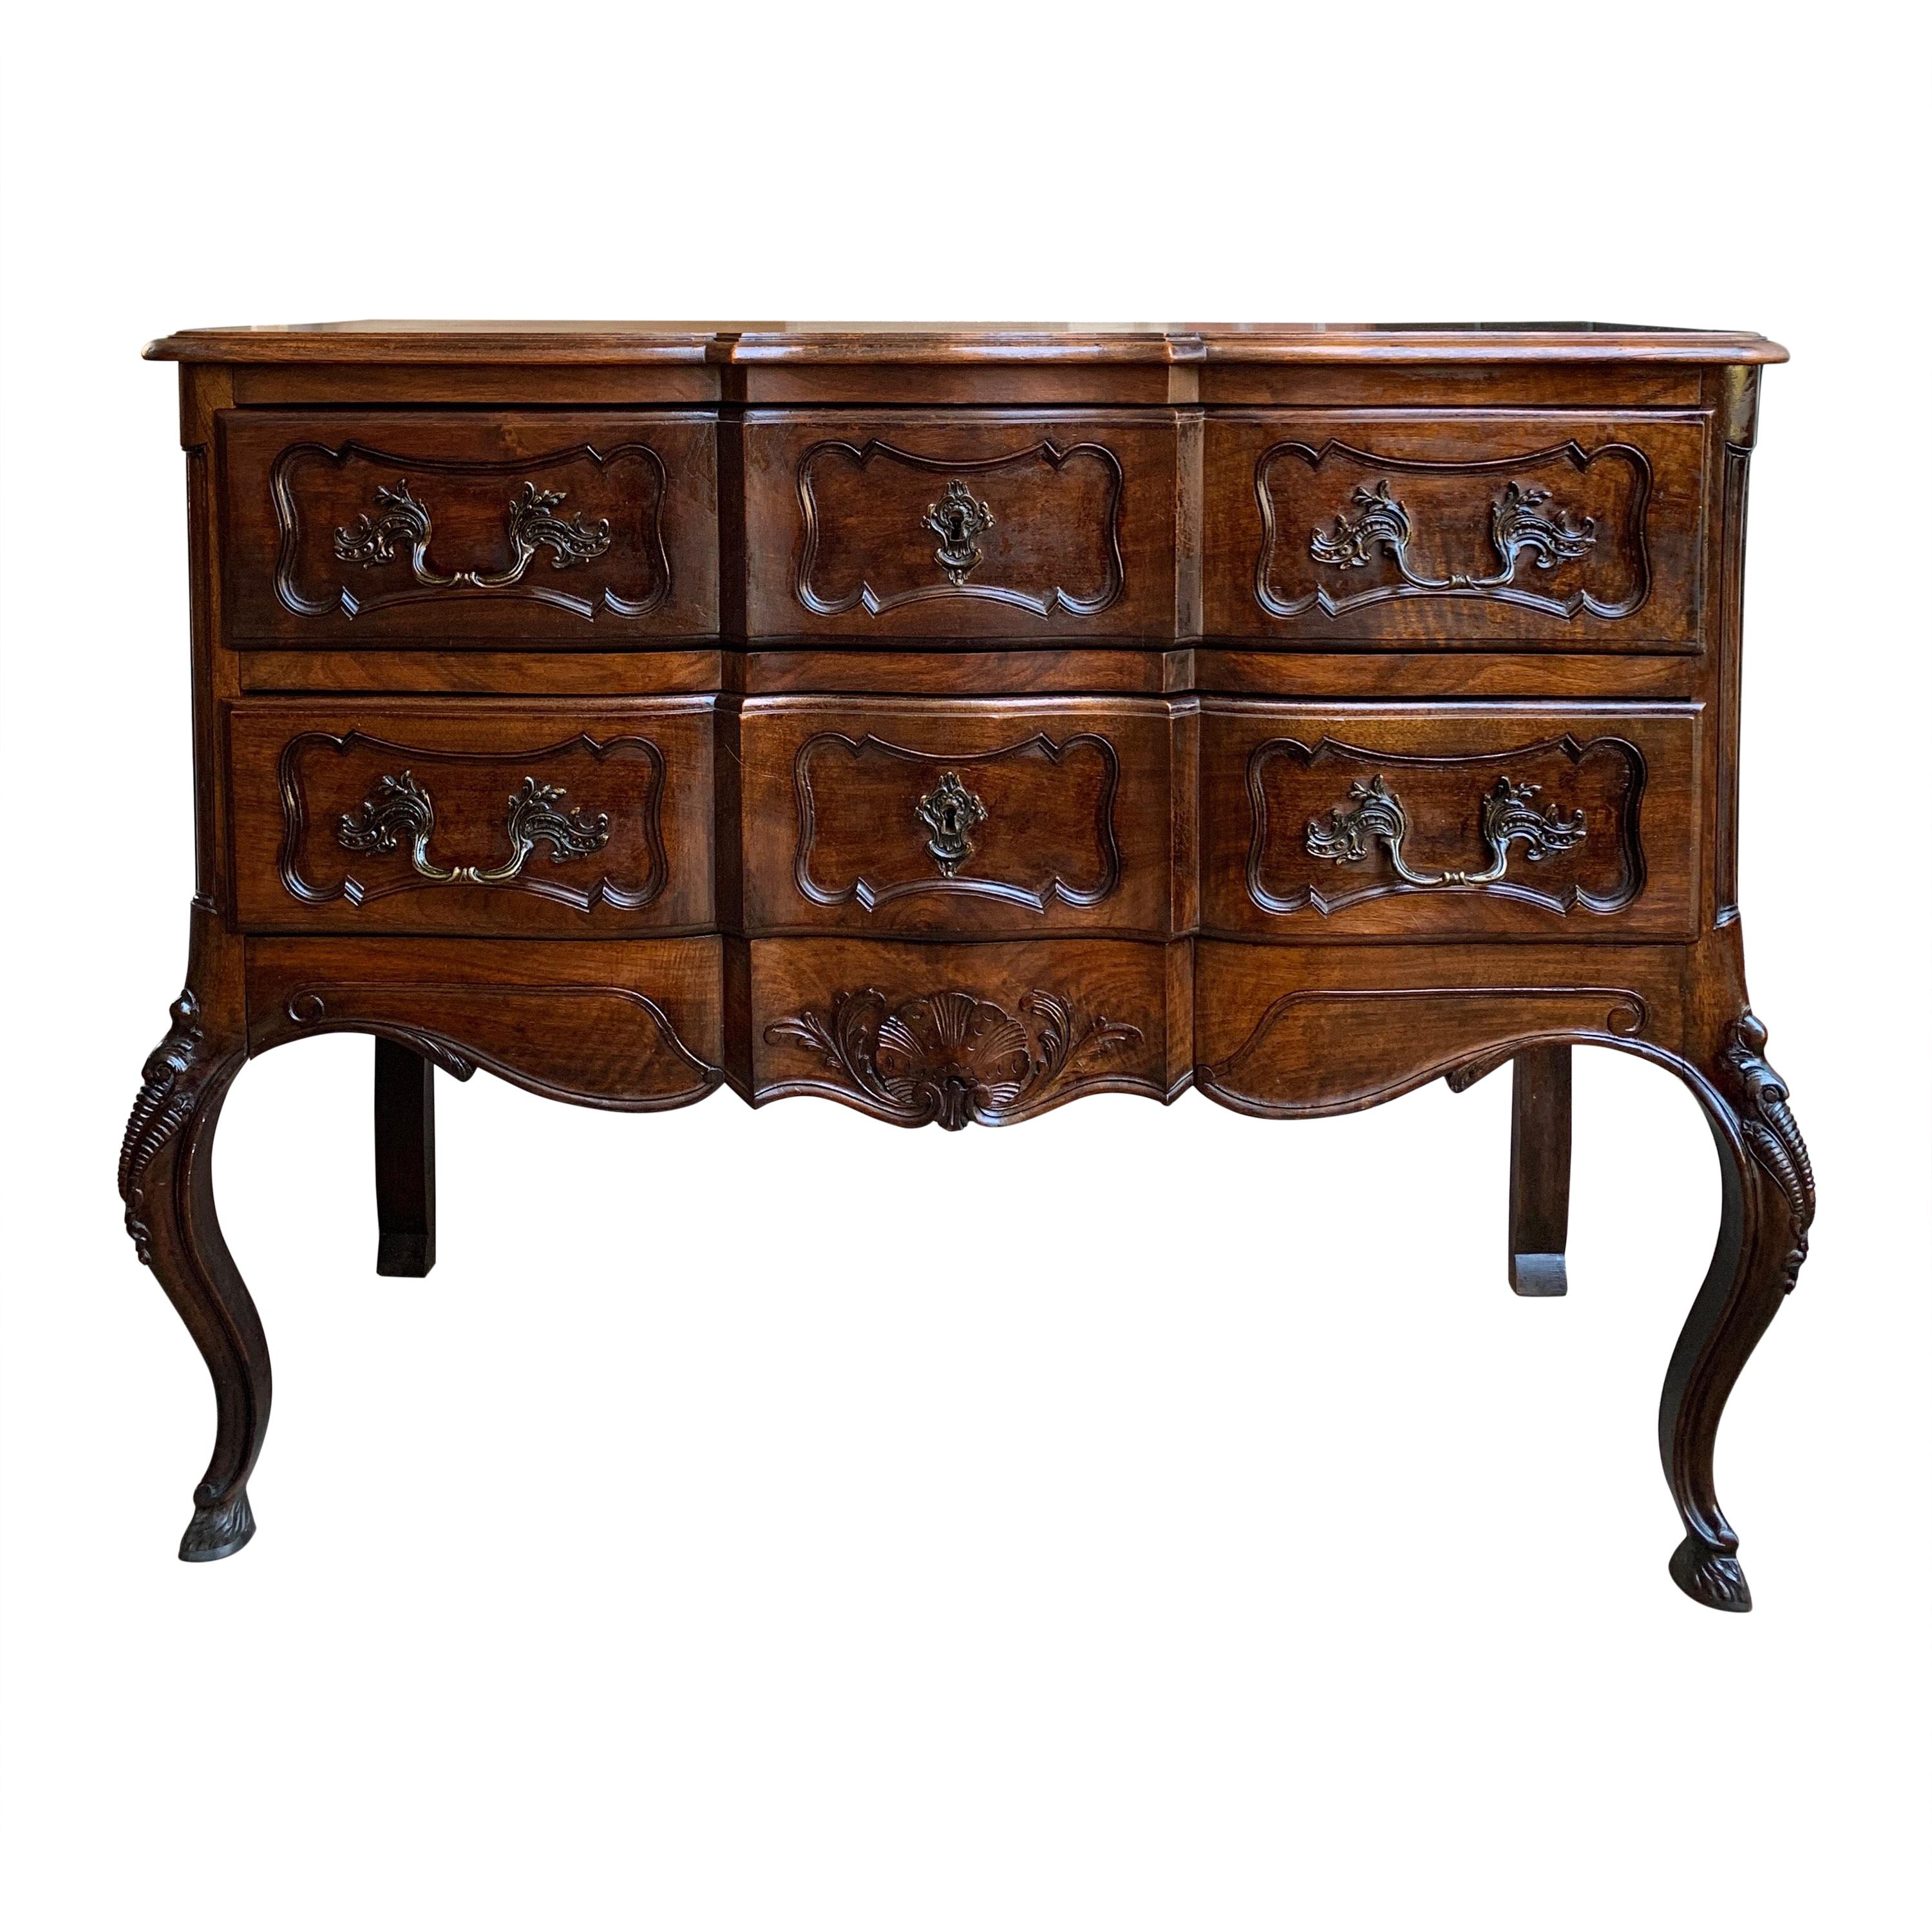 Antique French Carved Walnut Commode Chest of Drawers Sideboard Louis XV Style